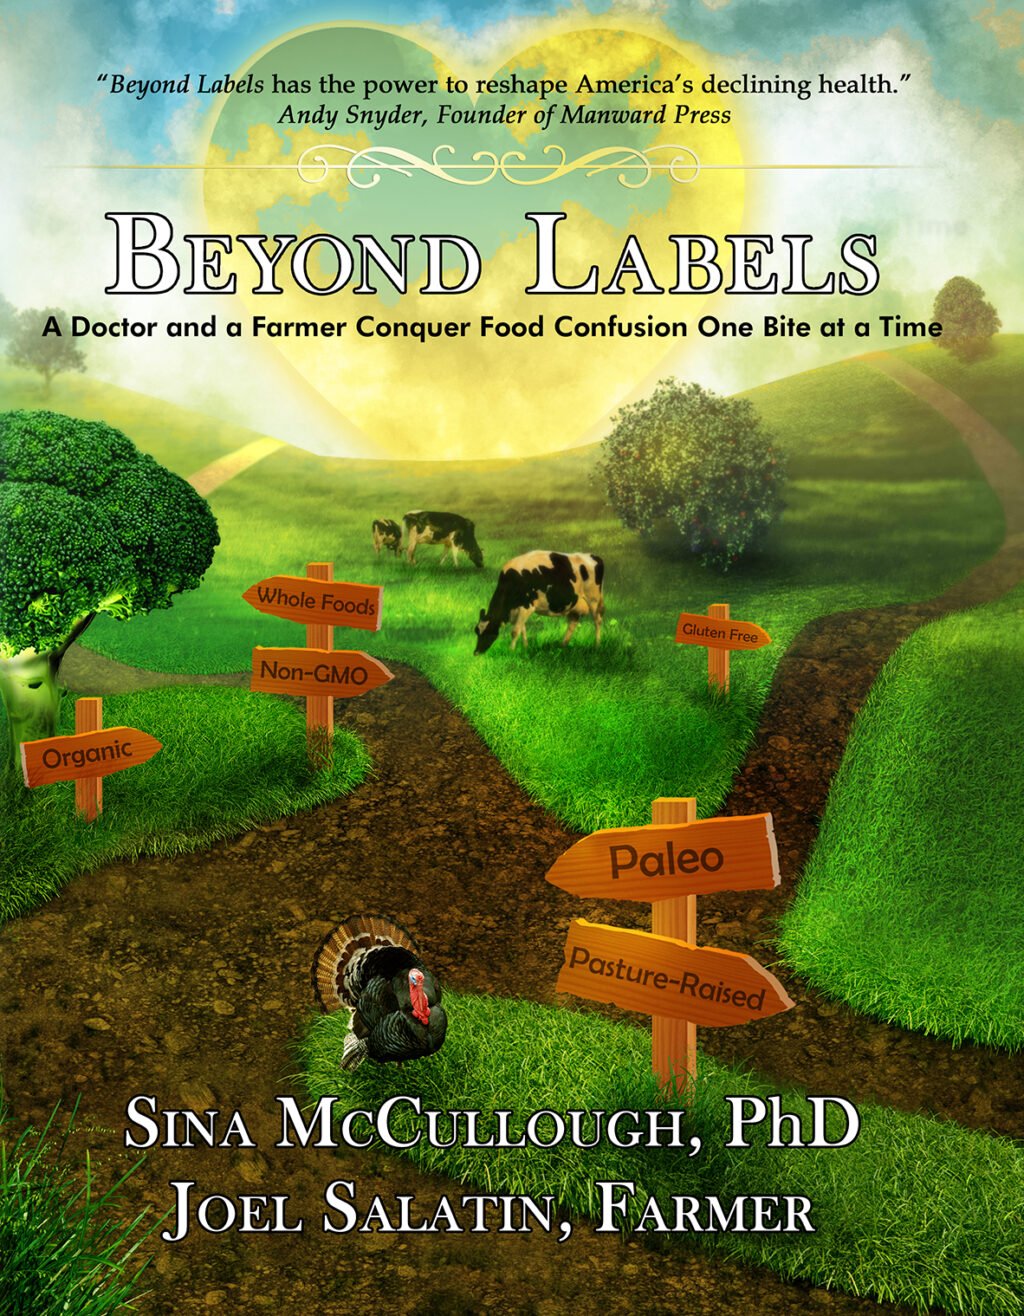 The Beyond Labels cover